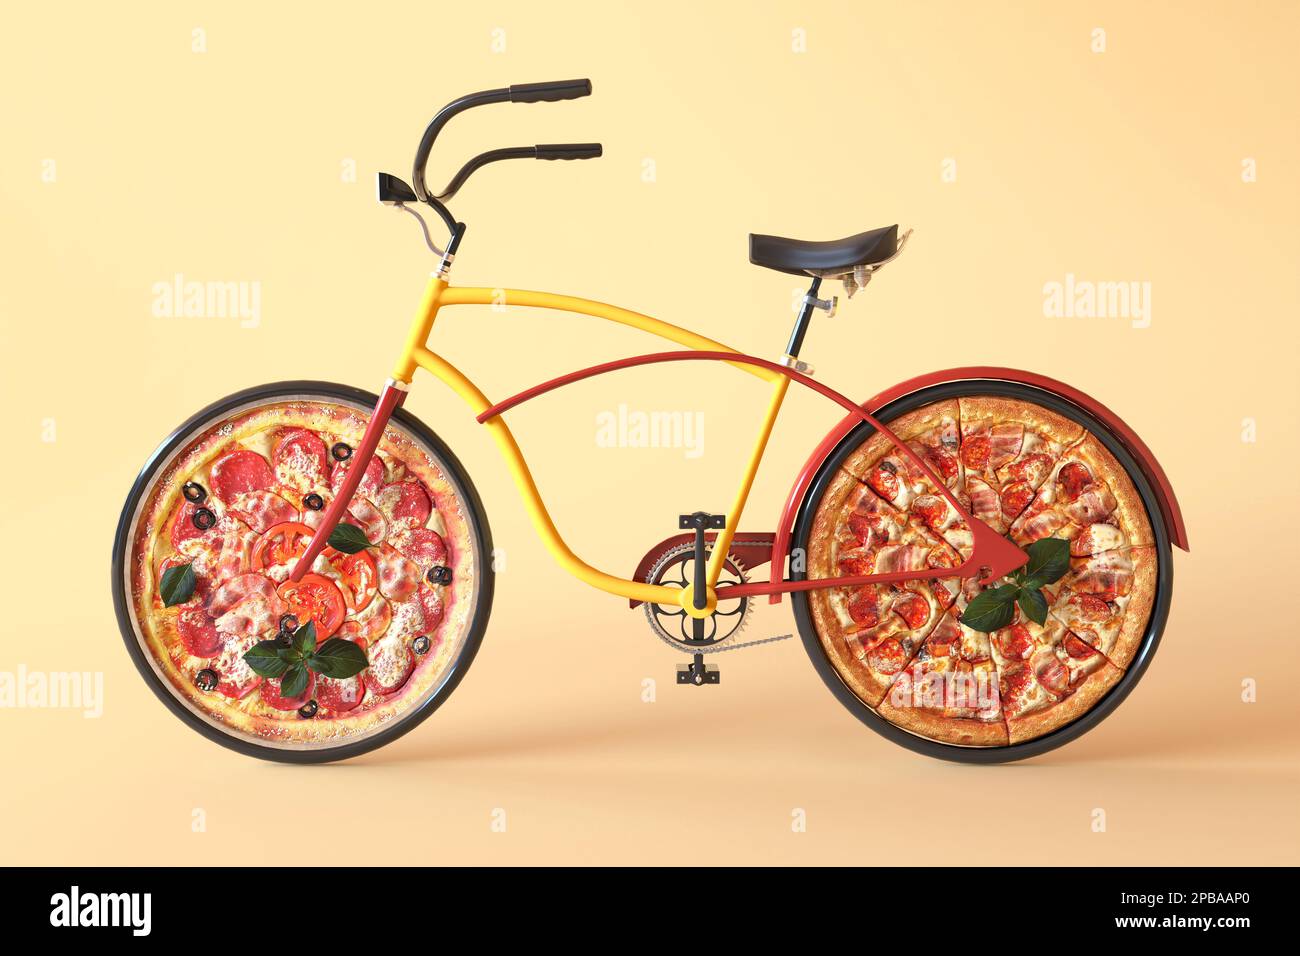 Pizza in bike wheels 3d illustration. Creative concept of tasty pizza delivery, food delivery service, Italian pizzeria banner flat lay, copyspace. Stock Photo